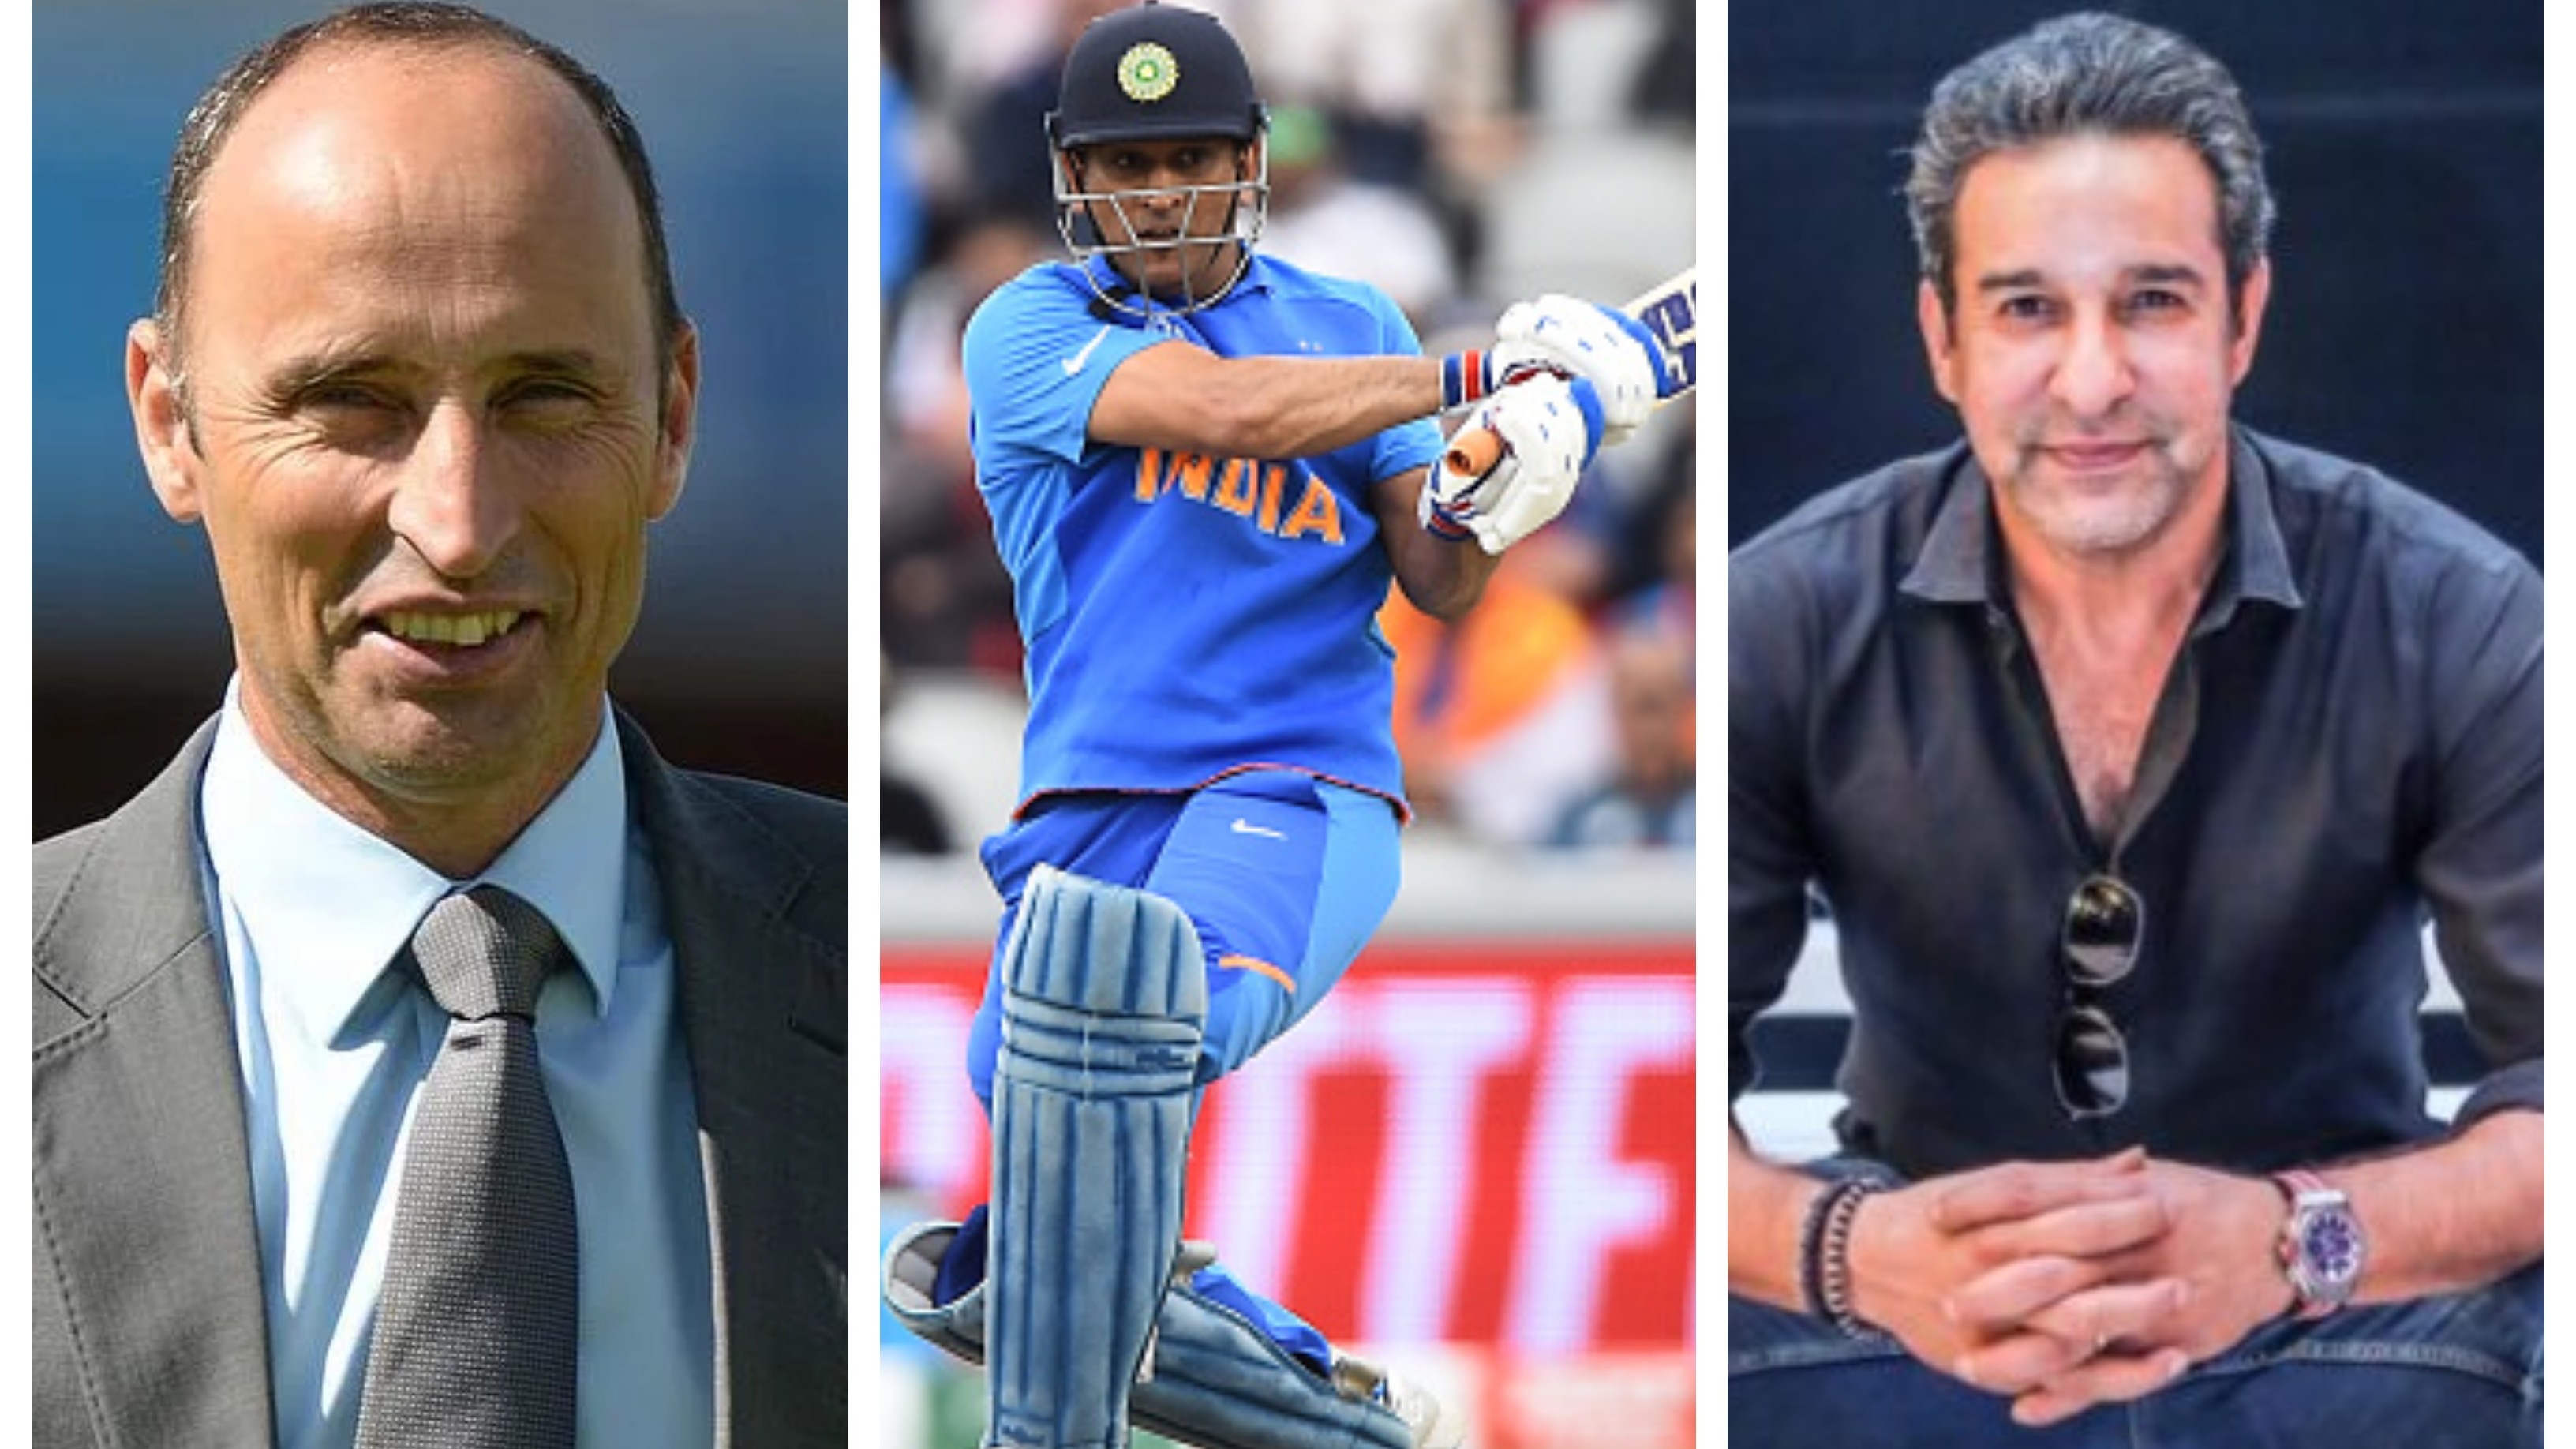 Nasser Hussain, Wasim Akram extend tribute message for MS Dhoni as he retires from international cricket